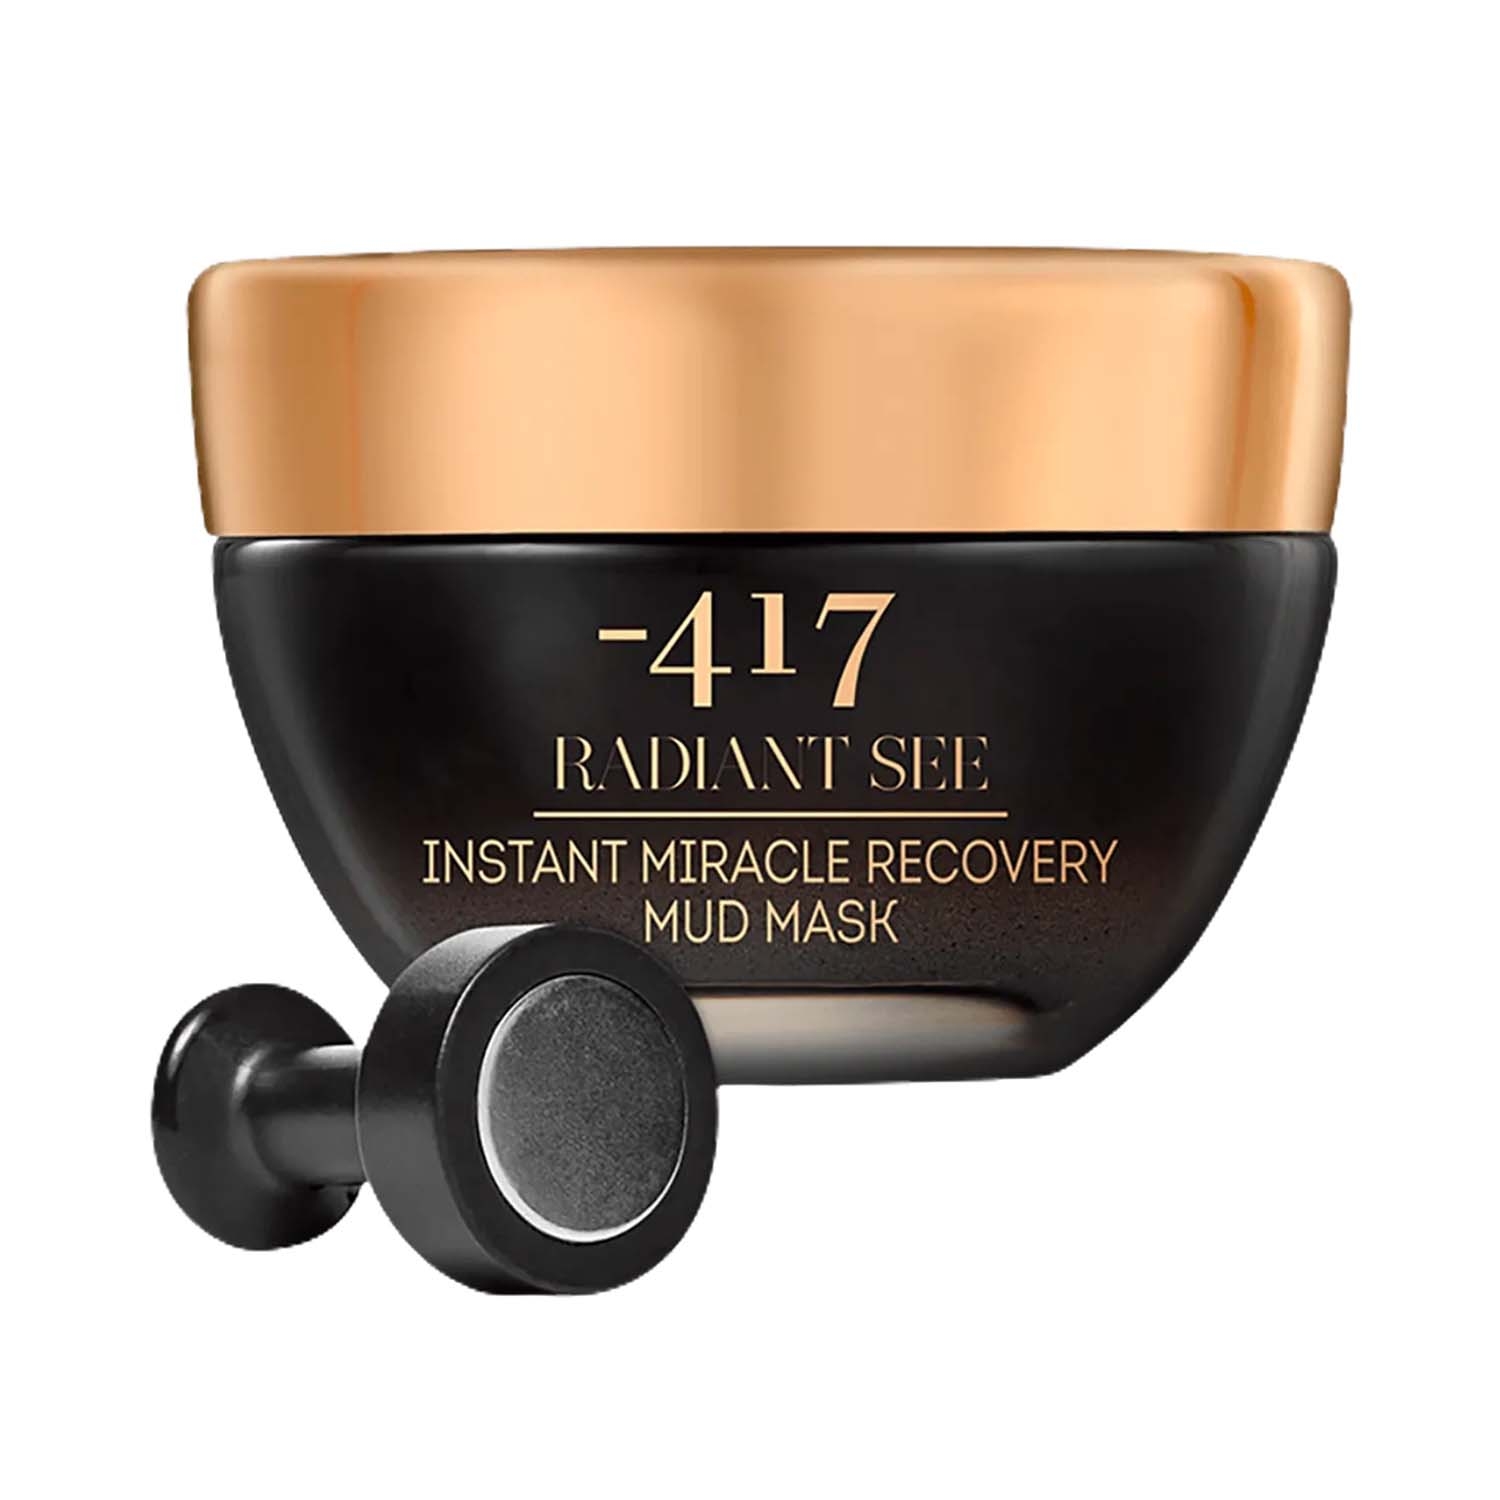 Minus 417 | Minus 417 Radiant See Instant Miracle Recovery Mud Mask (50ml)